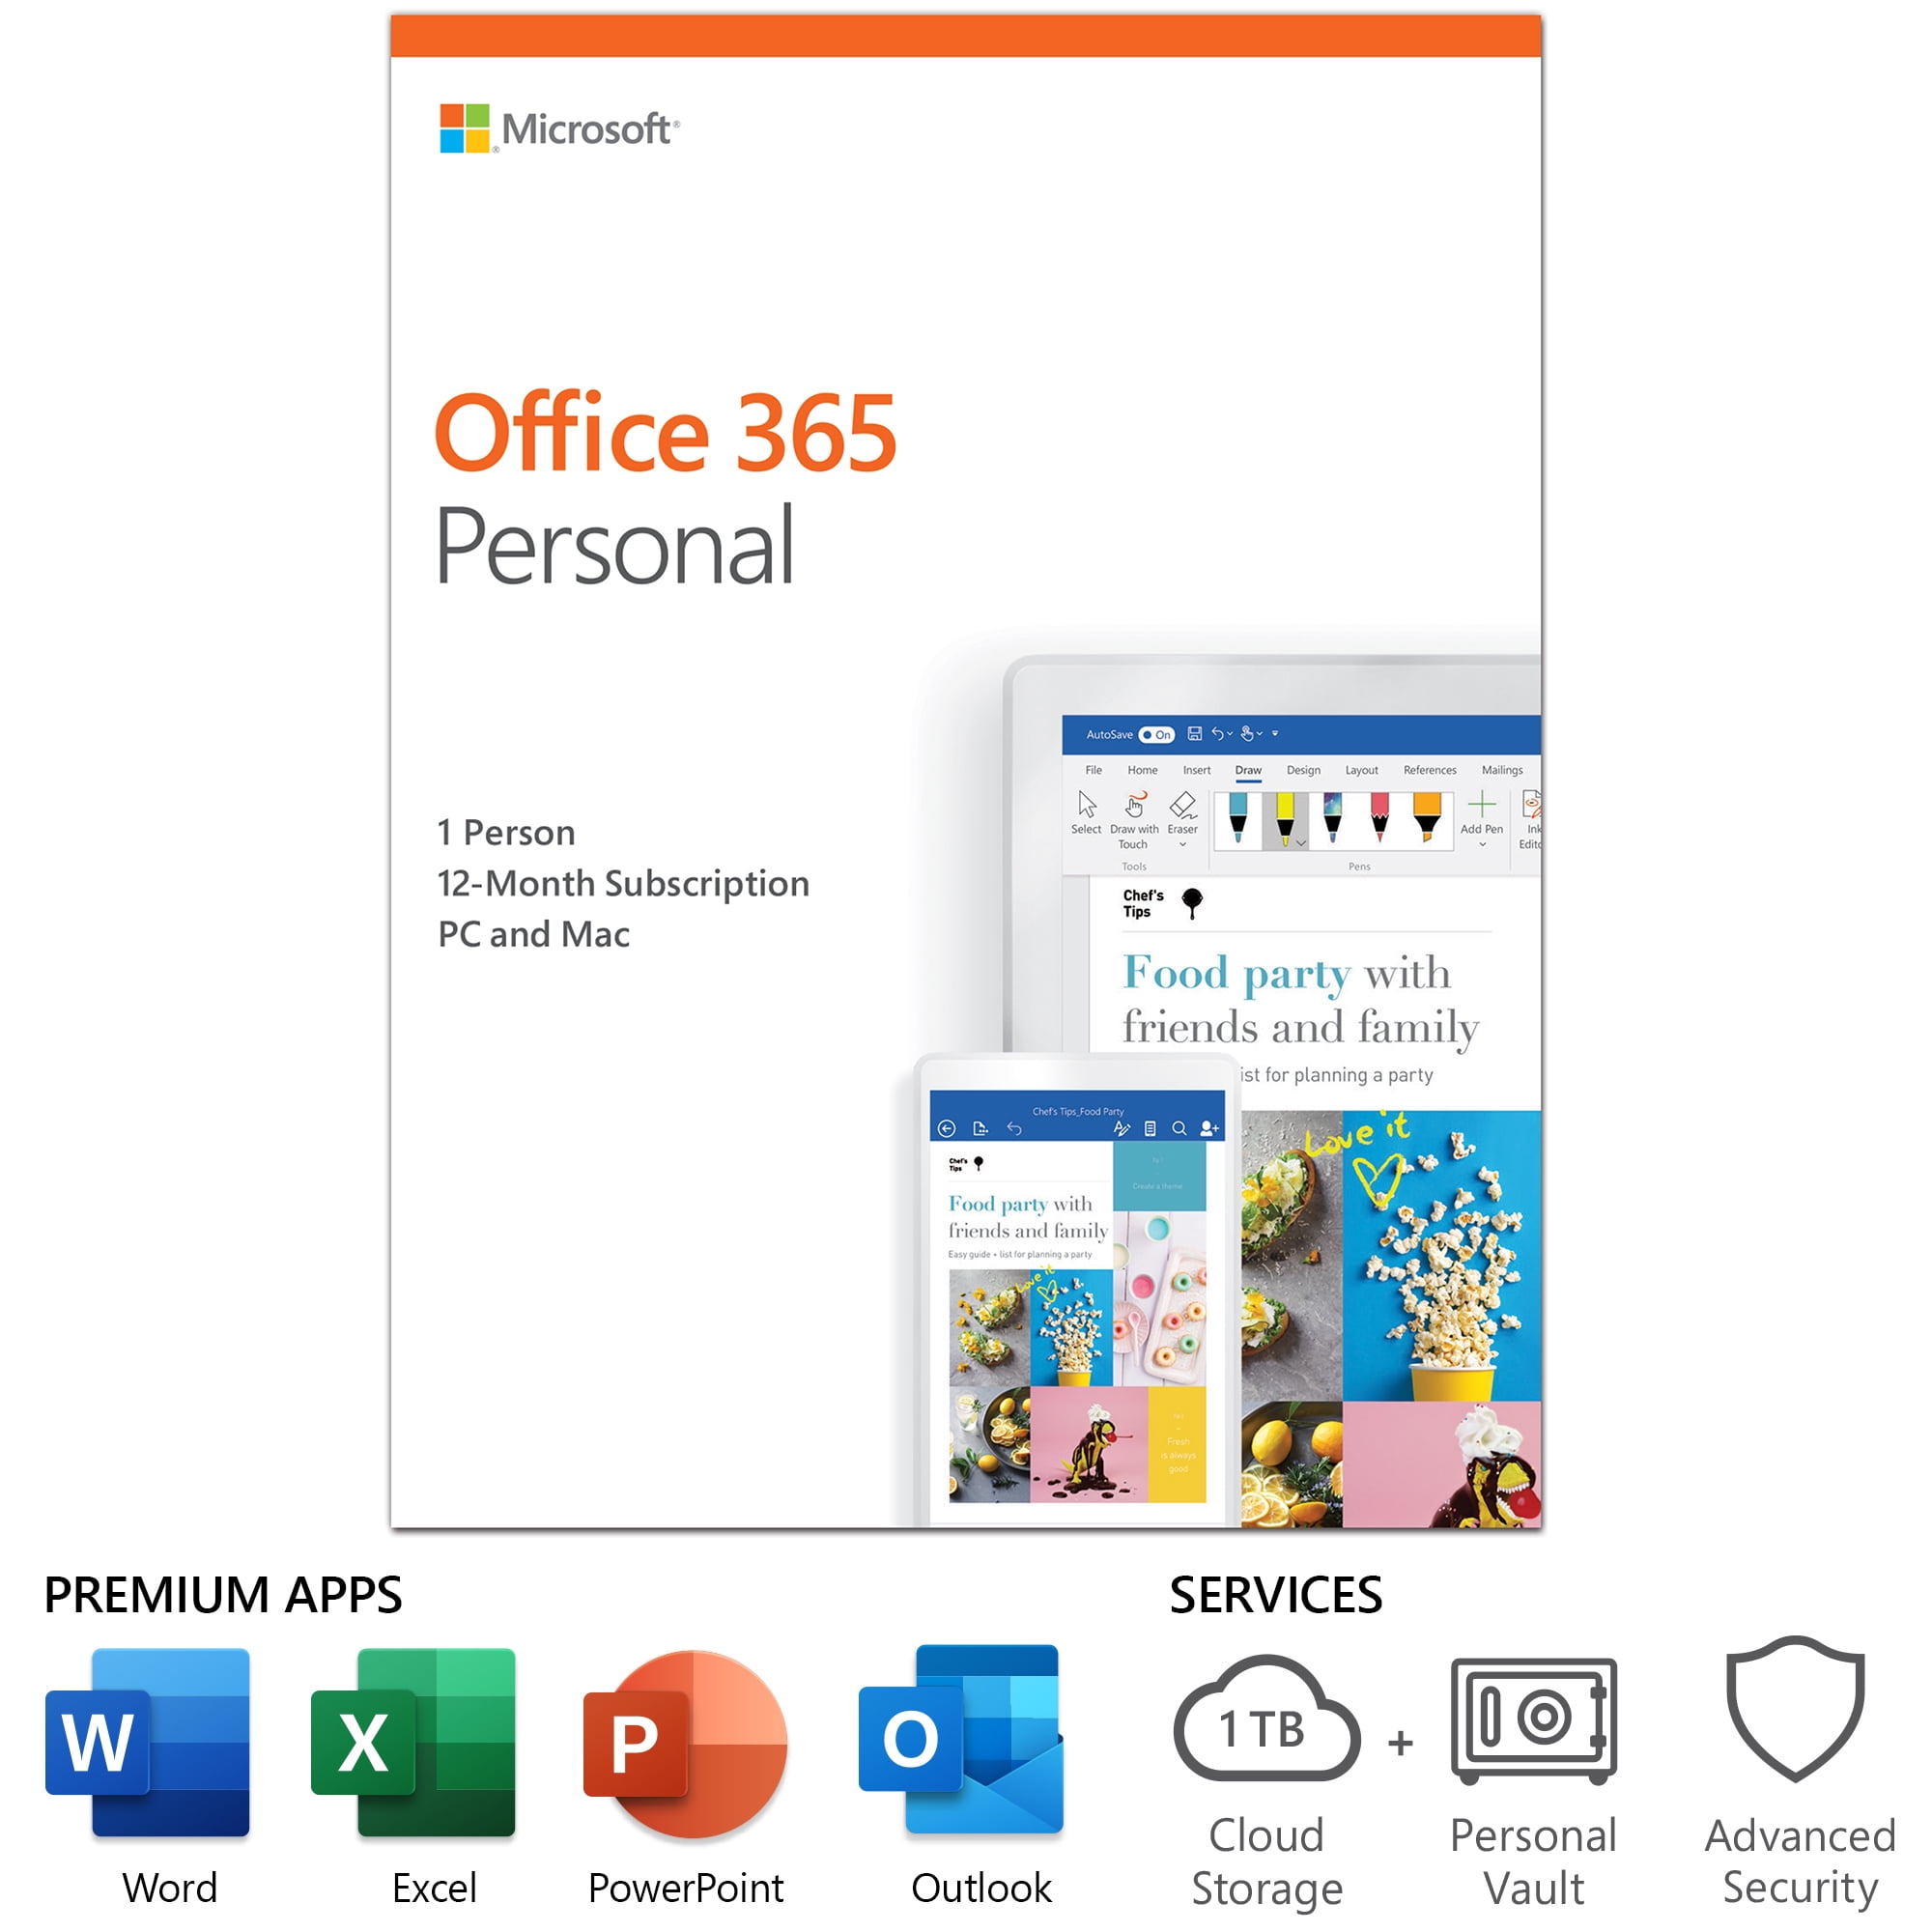 microsoft office 365 subscription product key